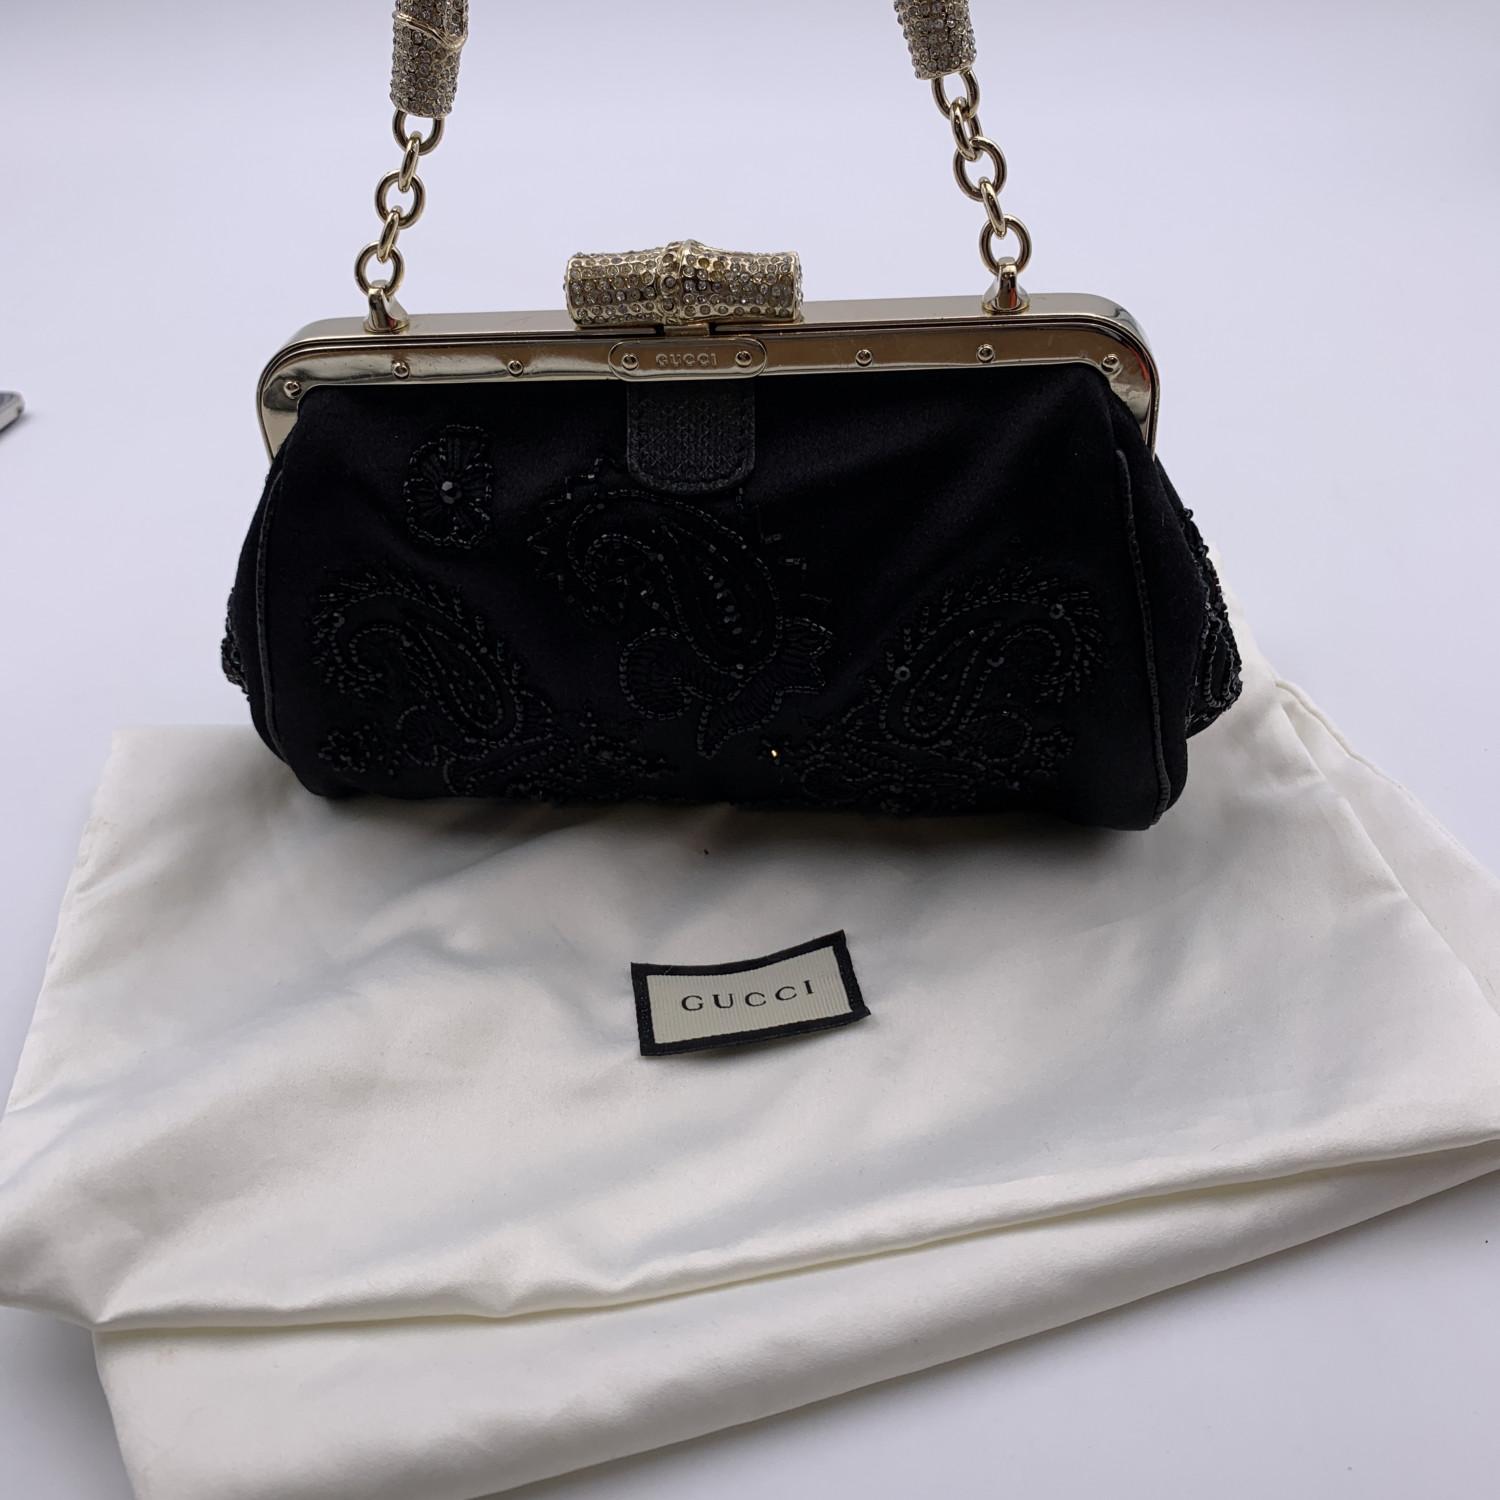 Gucci black embellished evening bag. Framed design. Gold metal hardware. Rhinestones detailing on the closure and on the handle.Black satin lining. 1 side open pocket inside. 'Gucci - Made in Italy' tag inside (with serial number on its